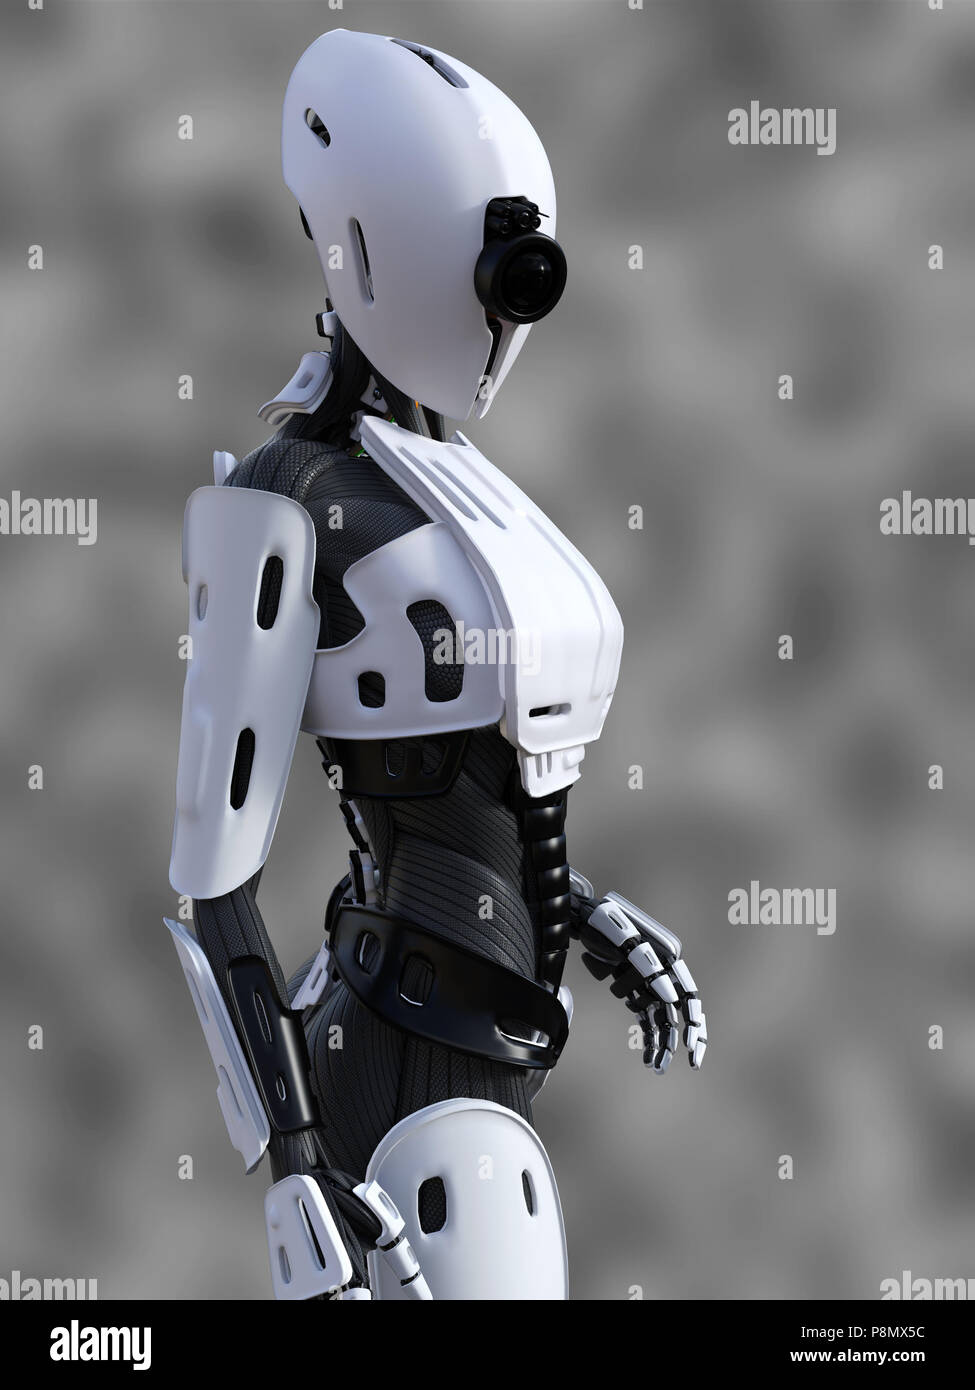 Android Robot High Resolution Stock Photography and Images - Alamy